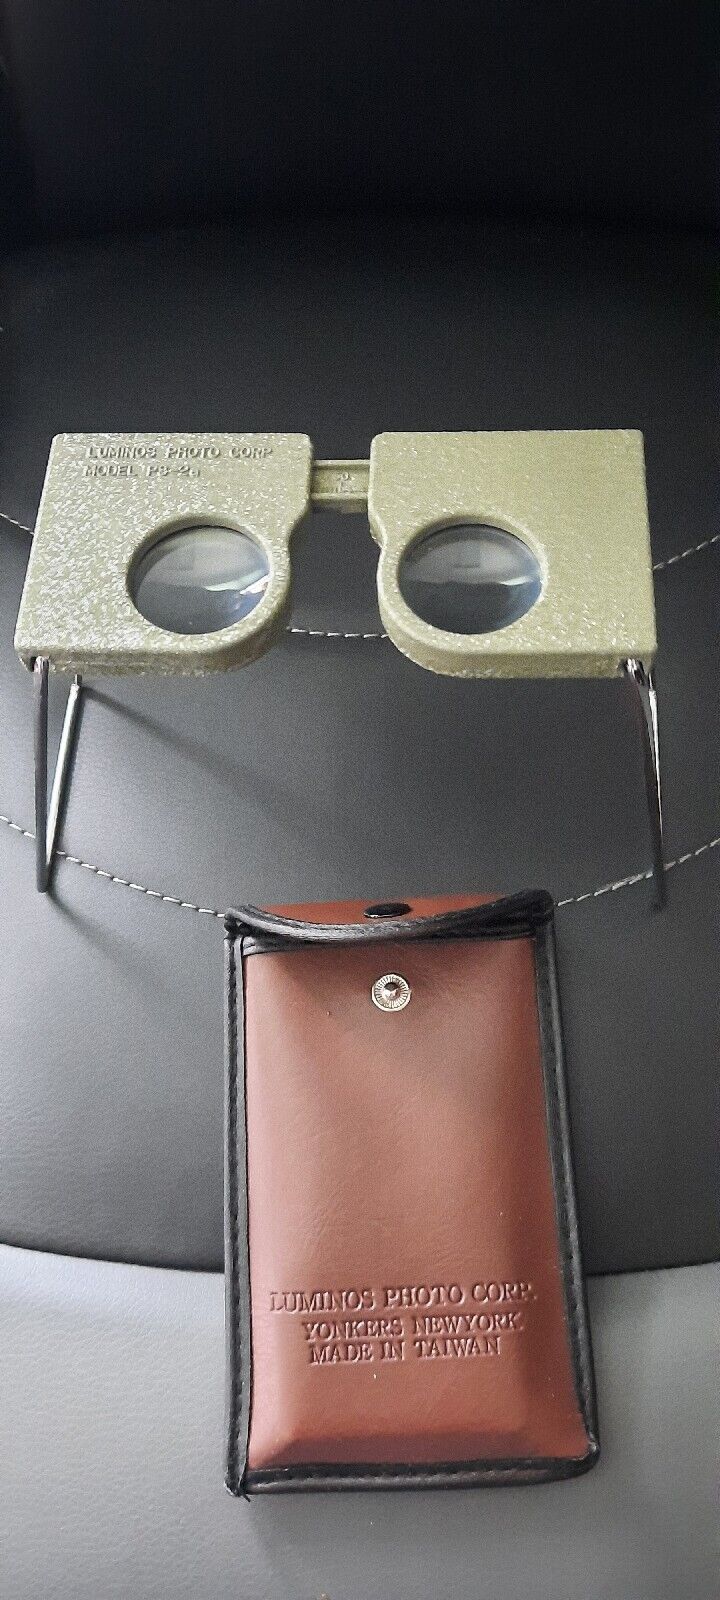 Pocket Stereo Viewer Stereoscope Model PS-2a